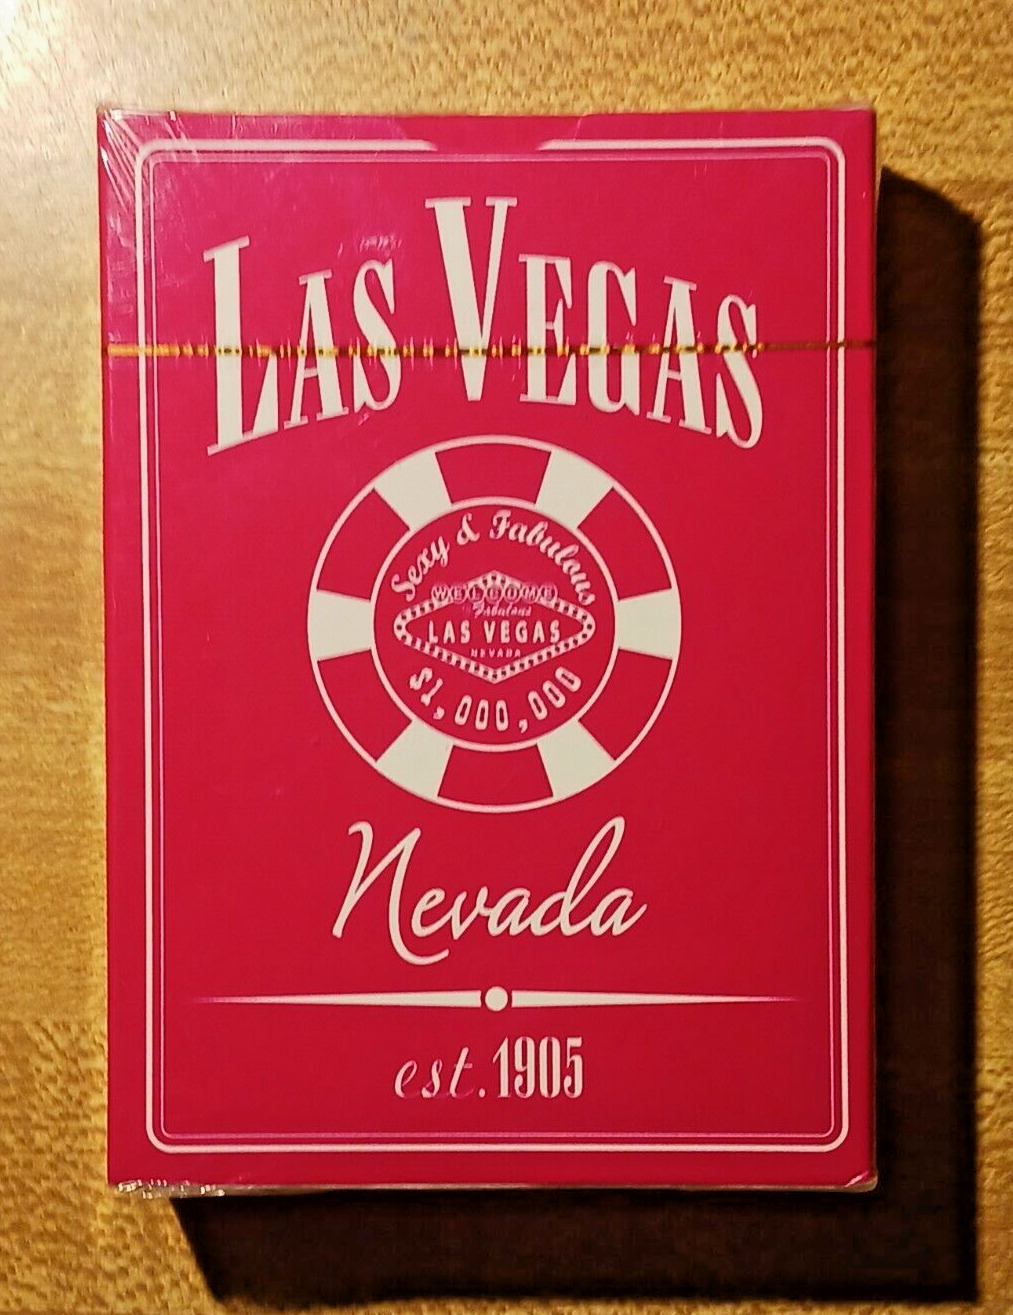 WELCOME TO Sexy FABULOUS LAS VEGAS NEVADA high quality playing cards RTSI Sealed